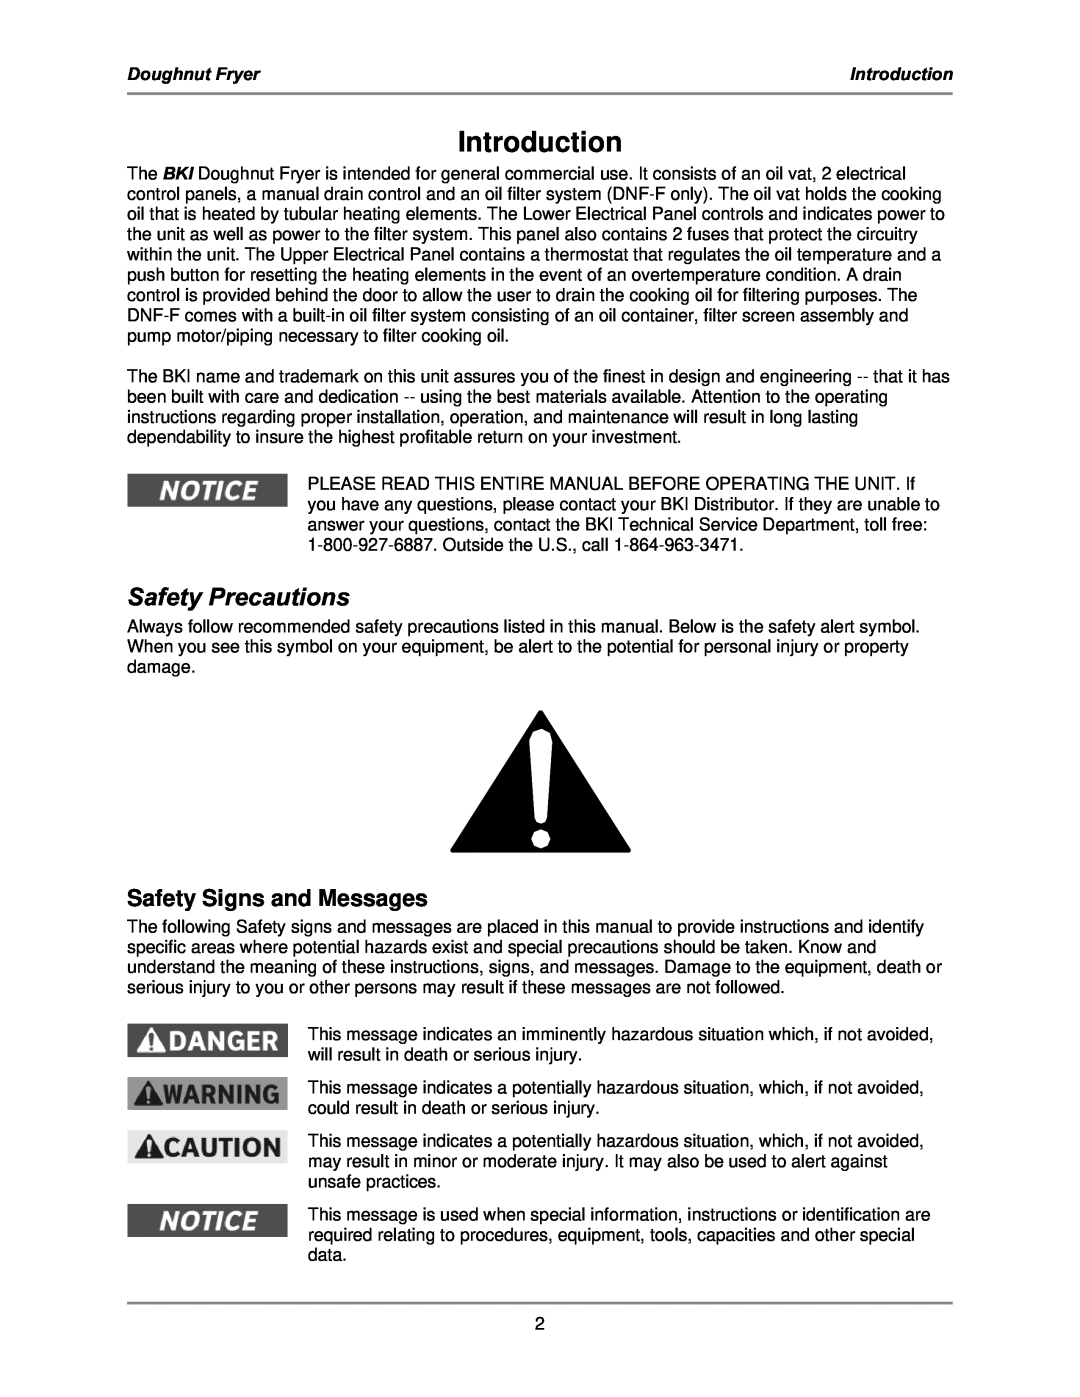 Bakers Pride Oven DNF-F operation manual Introduction, Safety Precautions, Safety Signs and Messages, Doughnut Fryer 